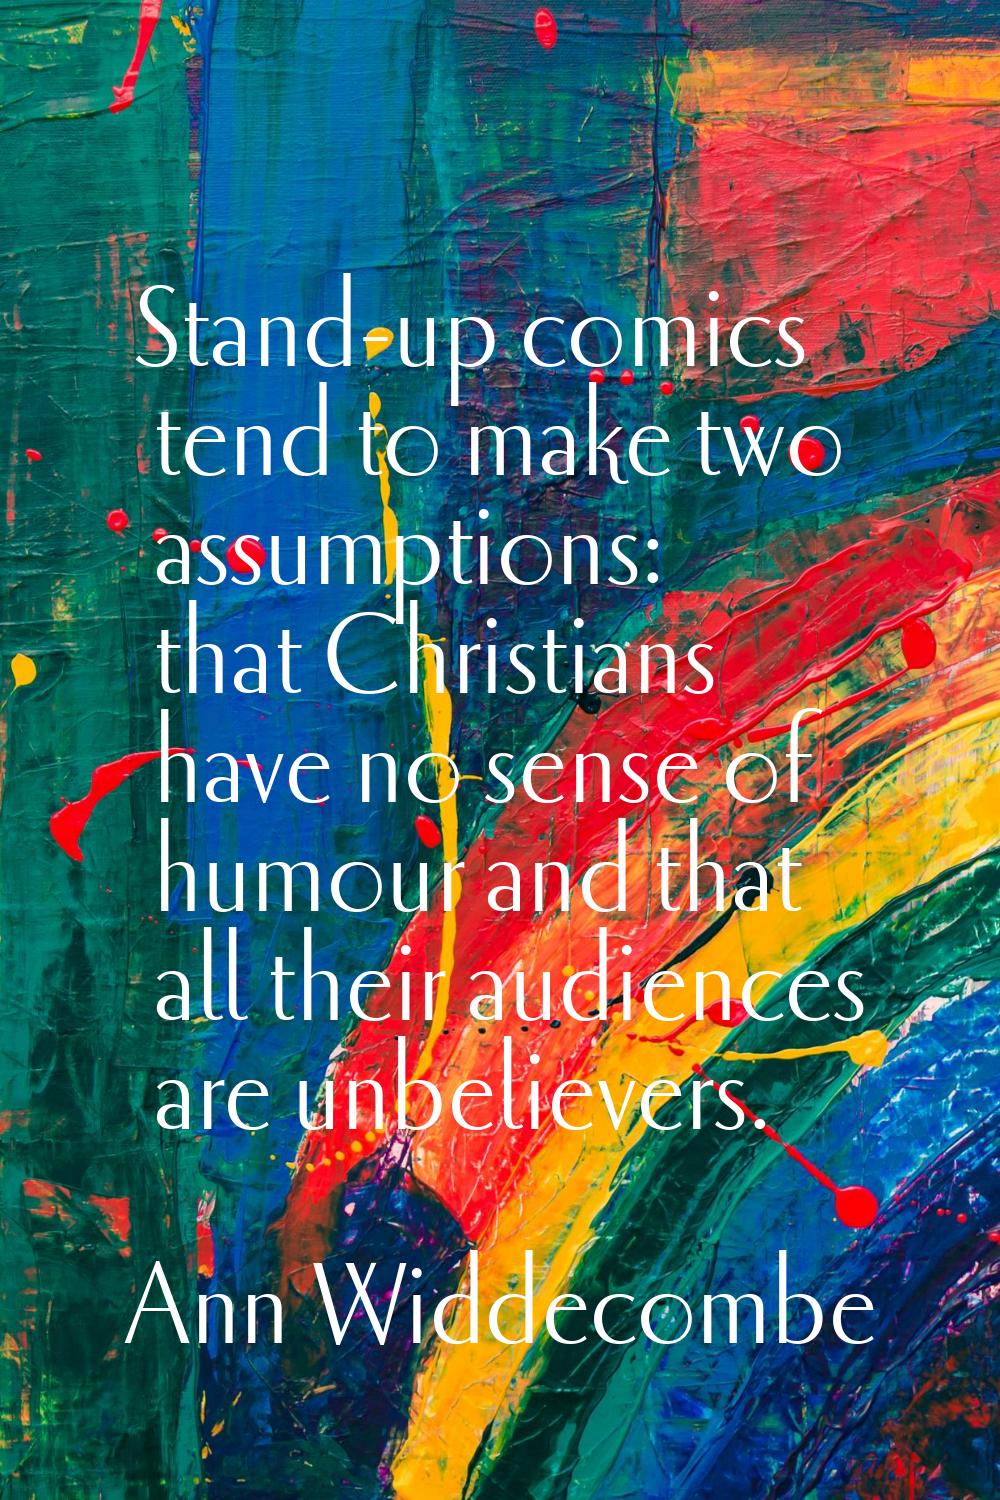 Stand-up comics tend to make two assumptions: that Christians have no sense of humour and that all 